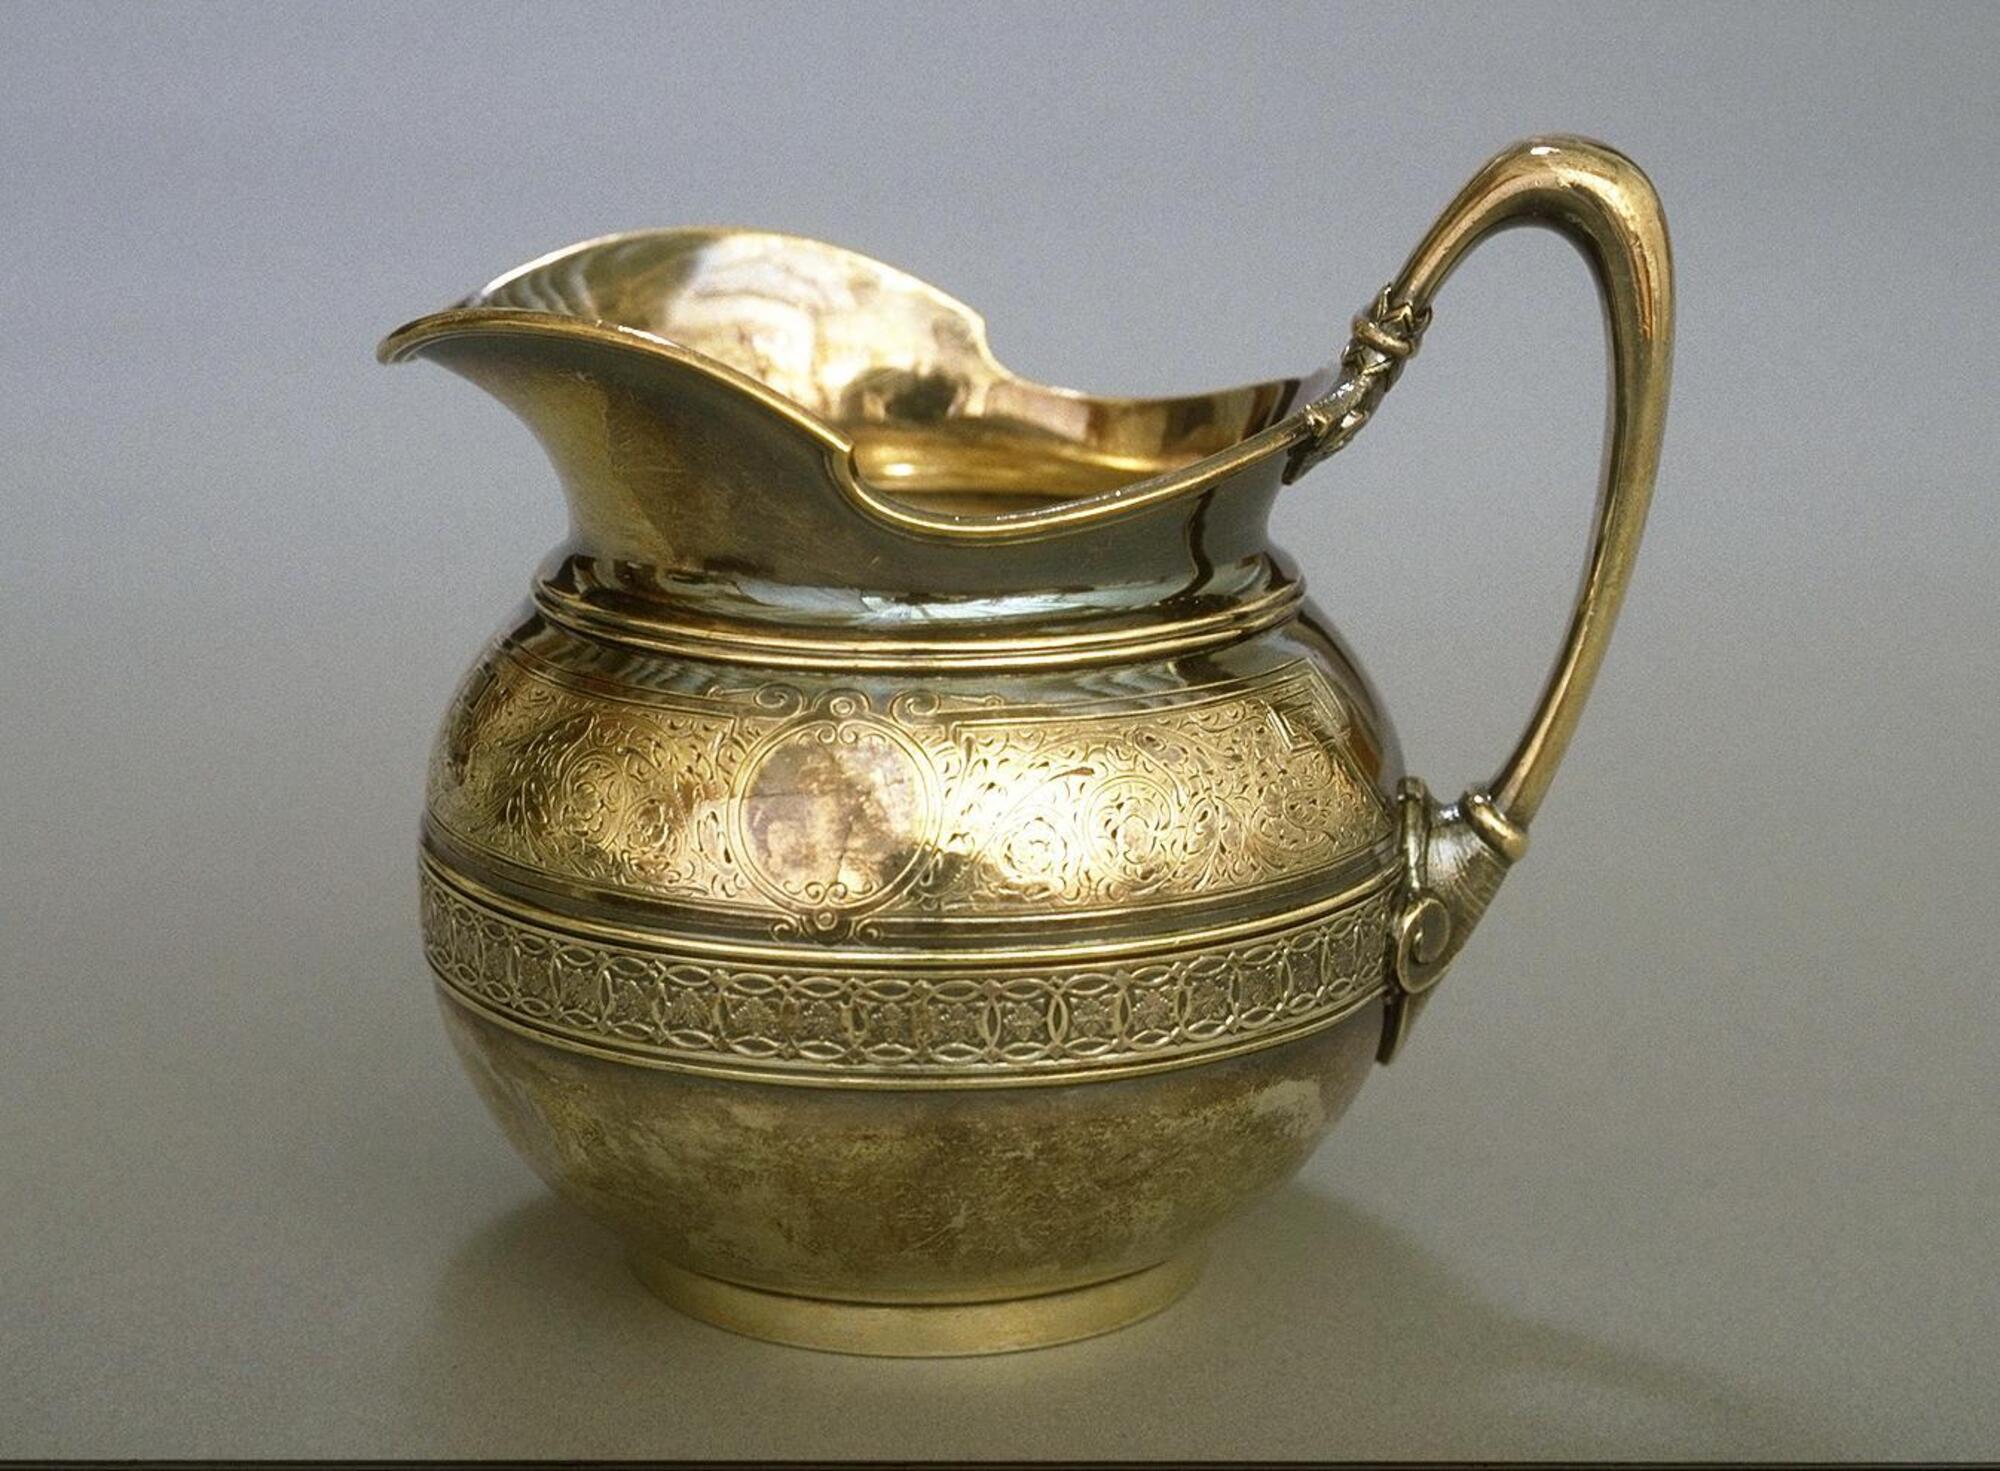 Silver pitcher-shaped vessel with handle and a band of decoration around center of the body